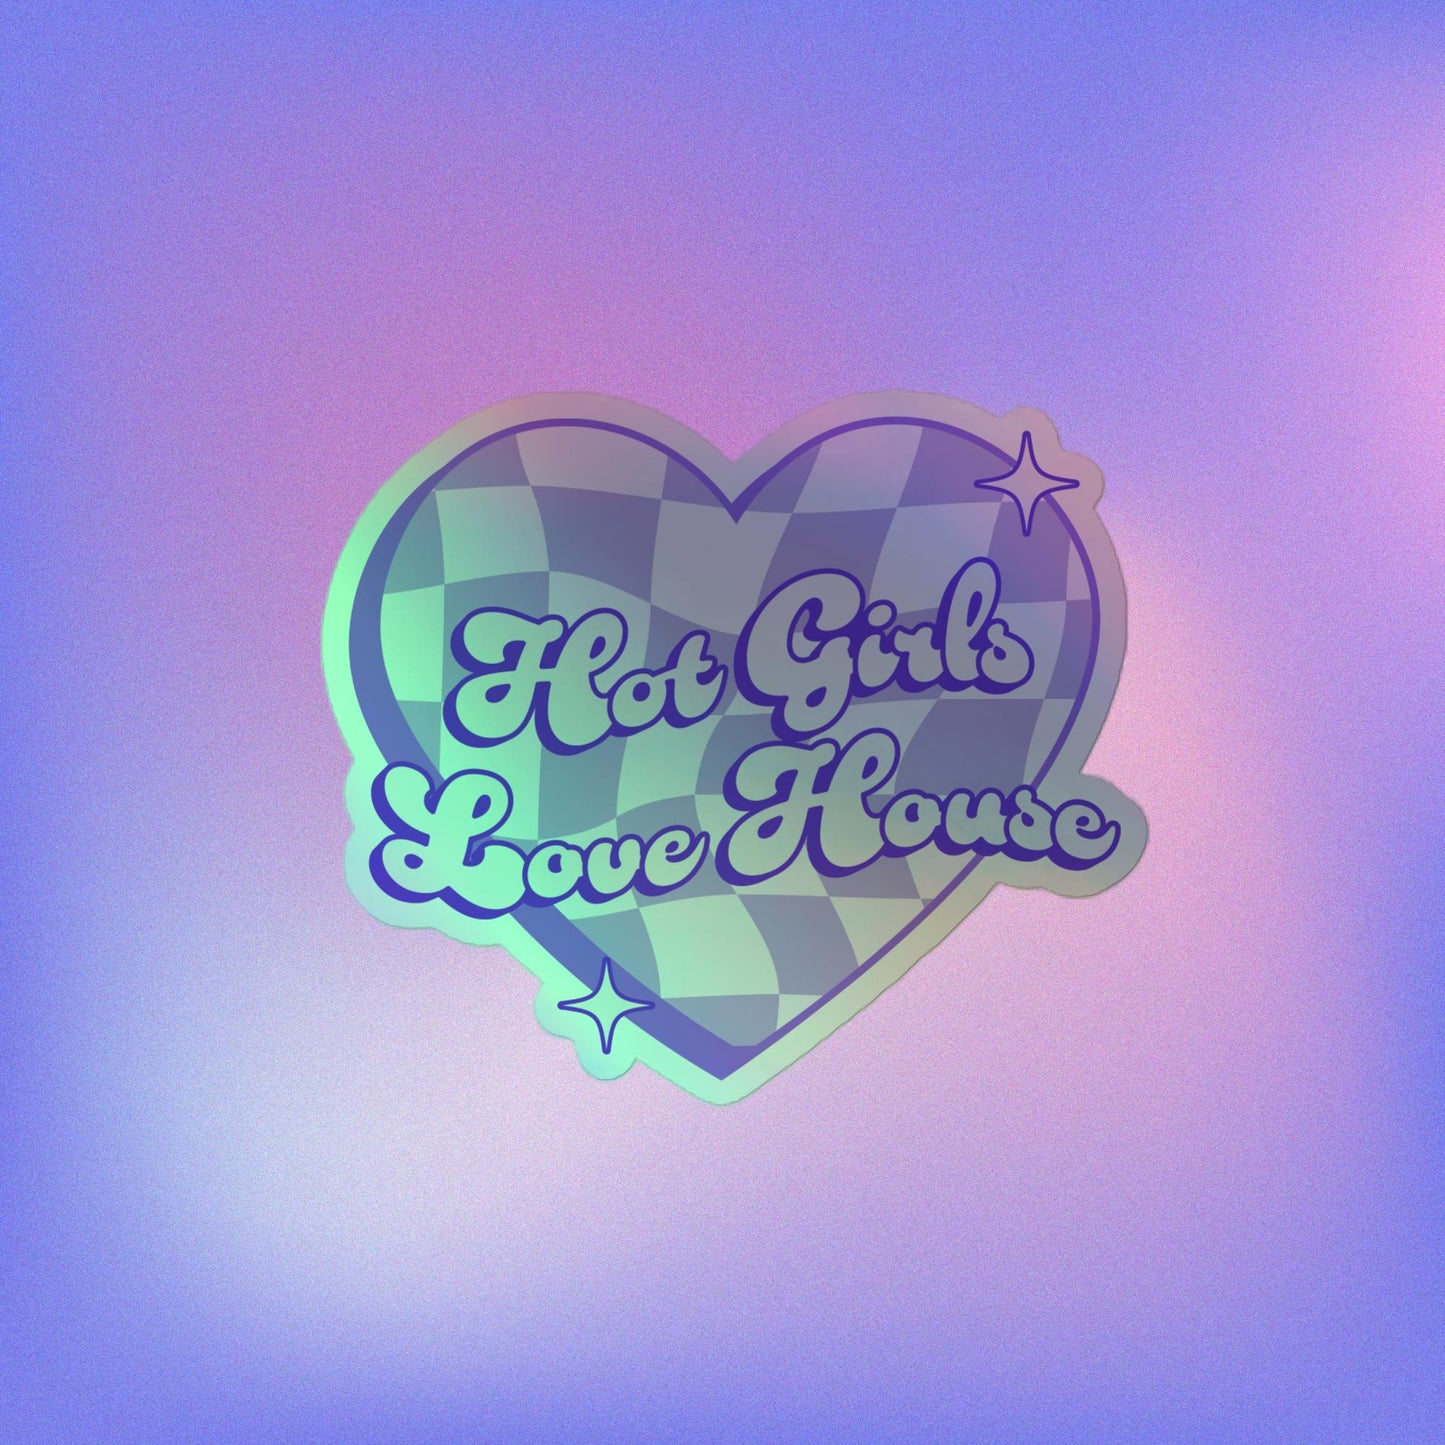 Hot Girls Love House Holographic Sticker